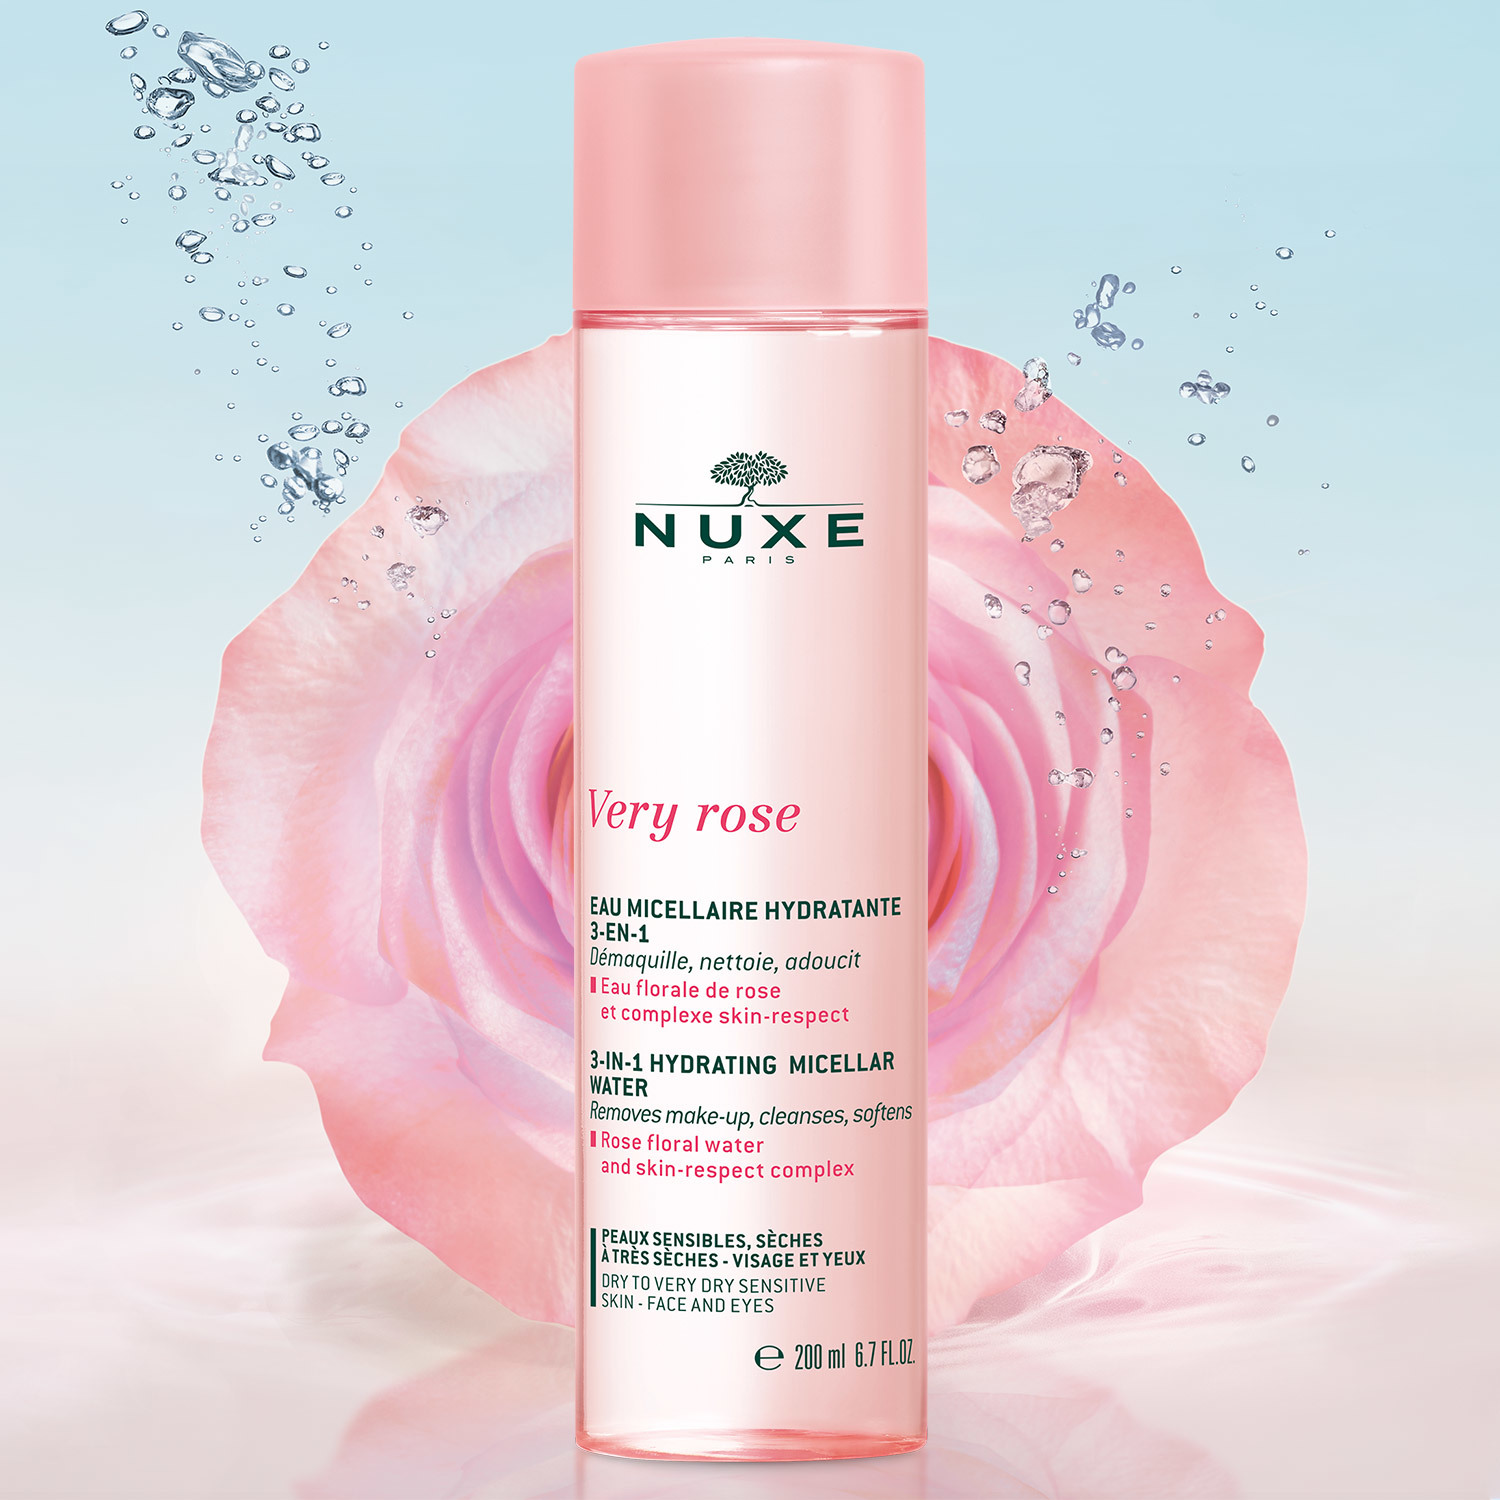 NUXE - Very Rose - Eau Micellaire Hydratante 3-in-1, 200ml